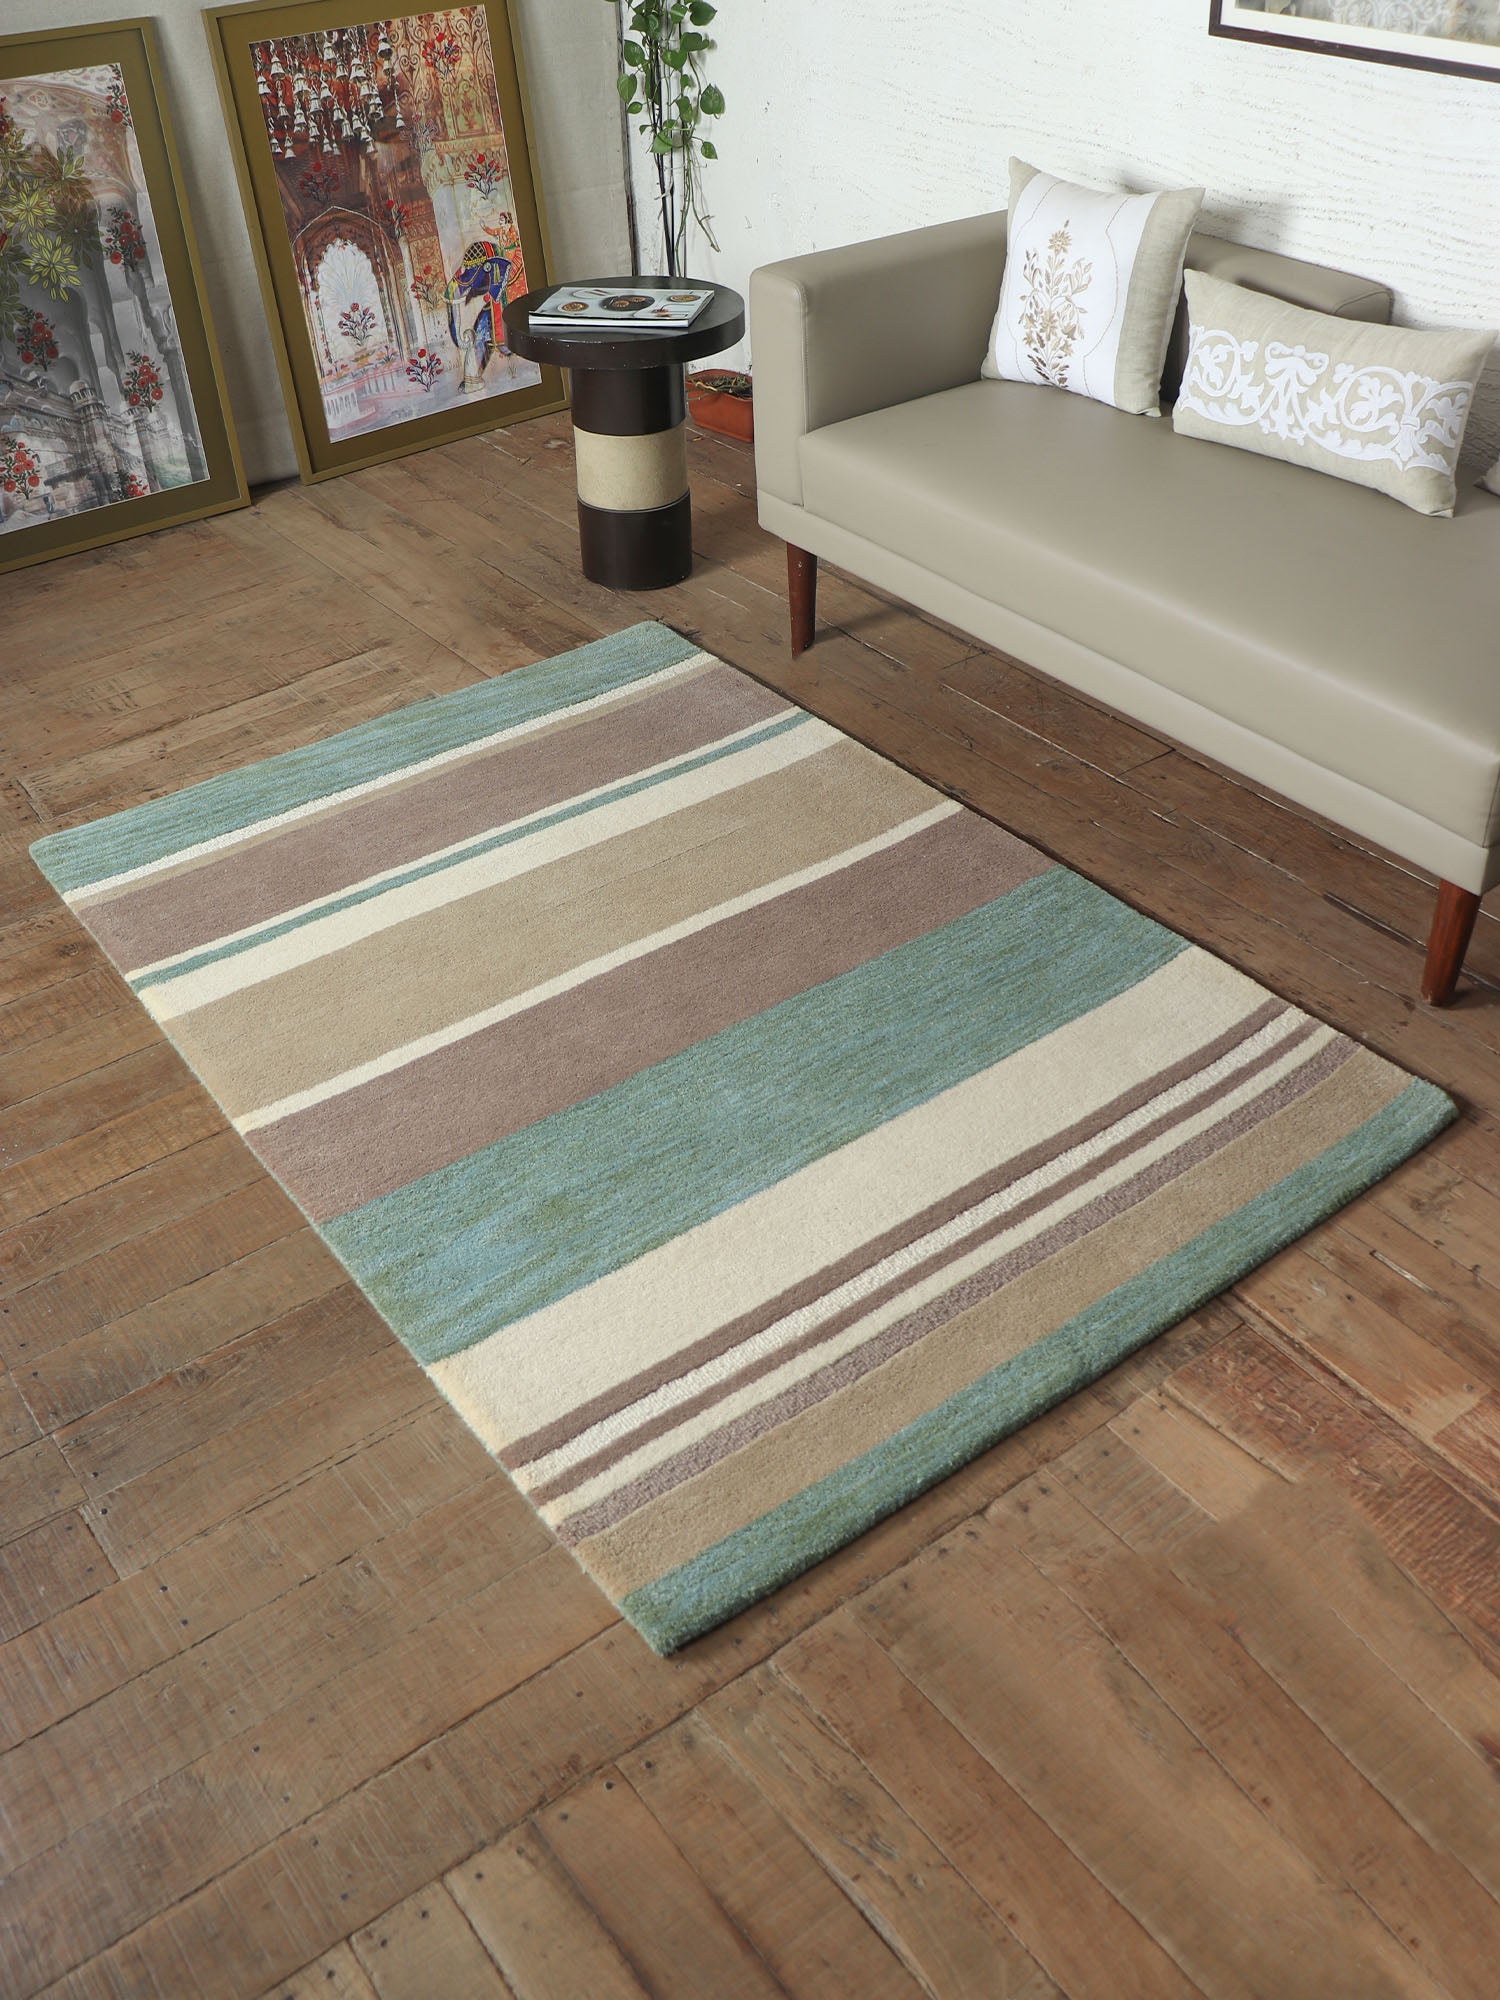 Hand Tufted 100% Wool | Abstract Stripes Non Slip Vintage Rug Premium Exclusive Carpet for Living Room, Bedroom, Office - (Green Brown, 4x6 Ft)